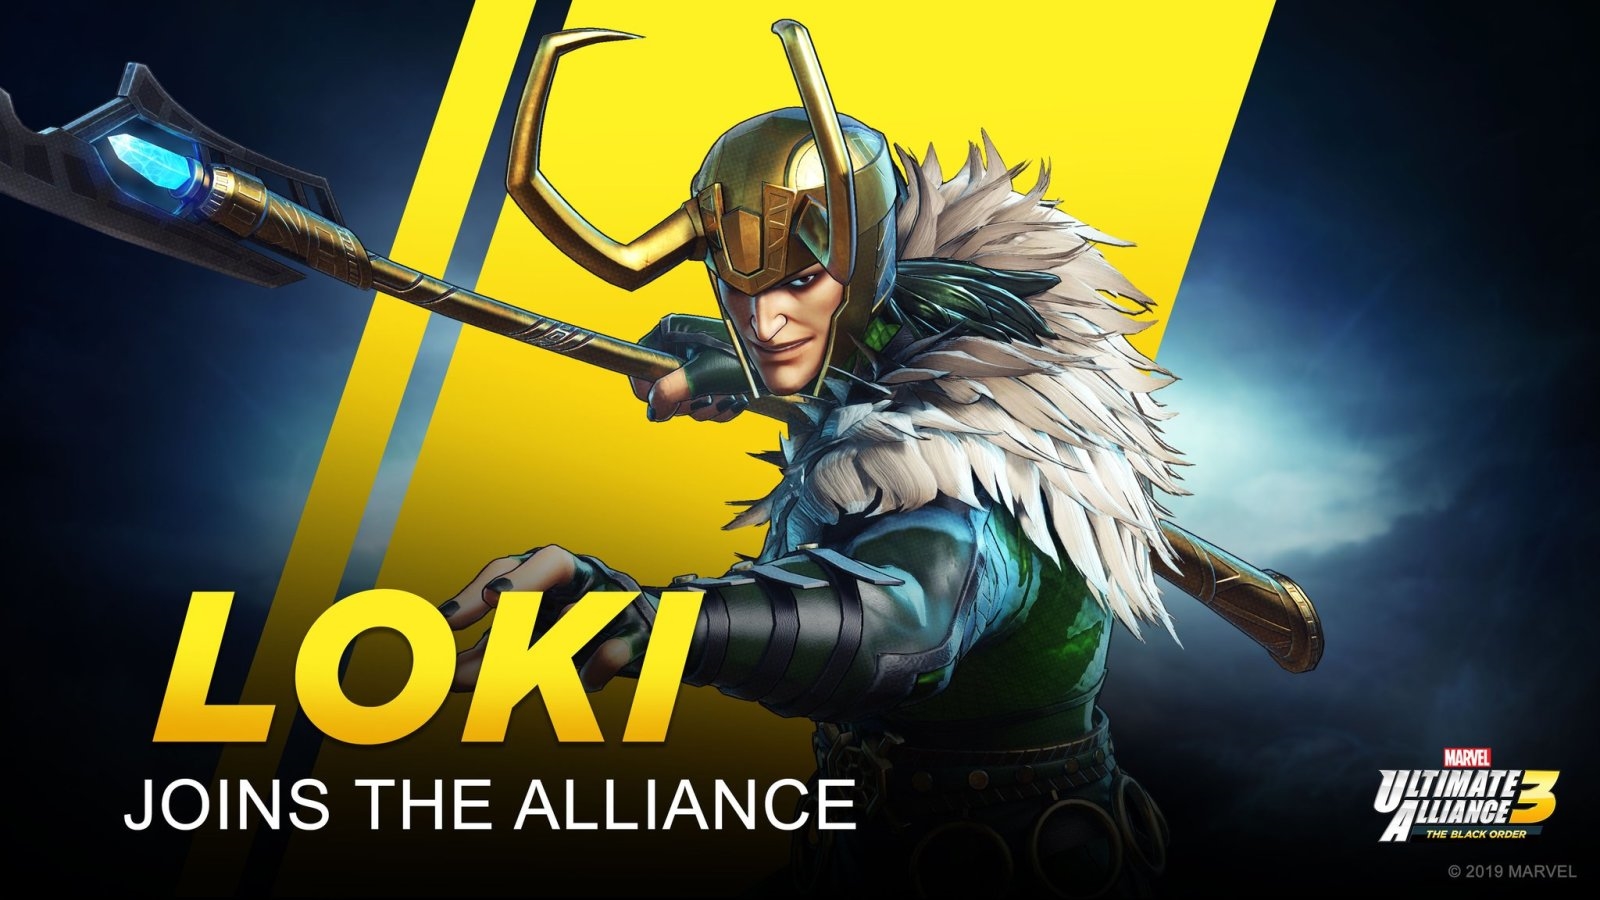 Loki is joining 'Marvel Ultimate Alliance 3' for Switch | DeviceDaily.com